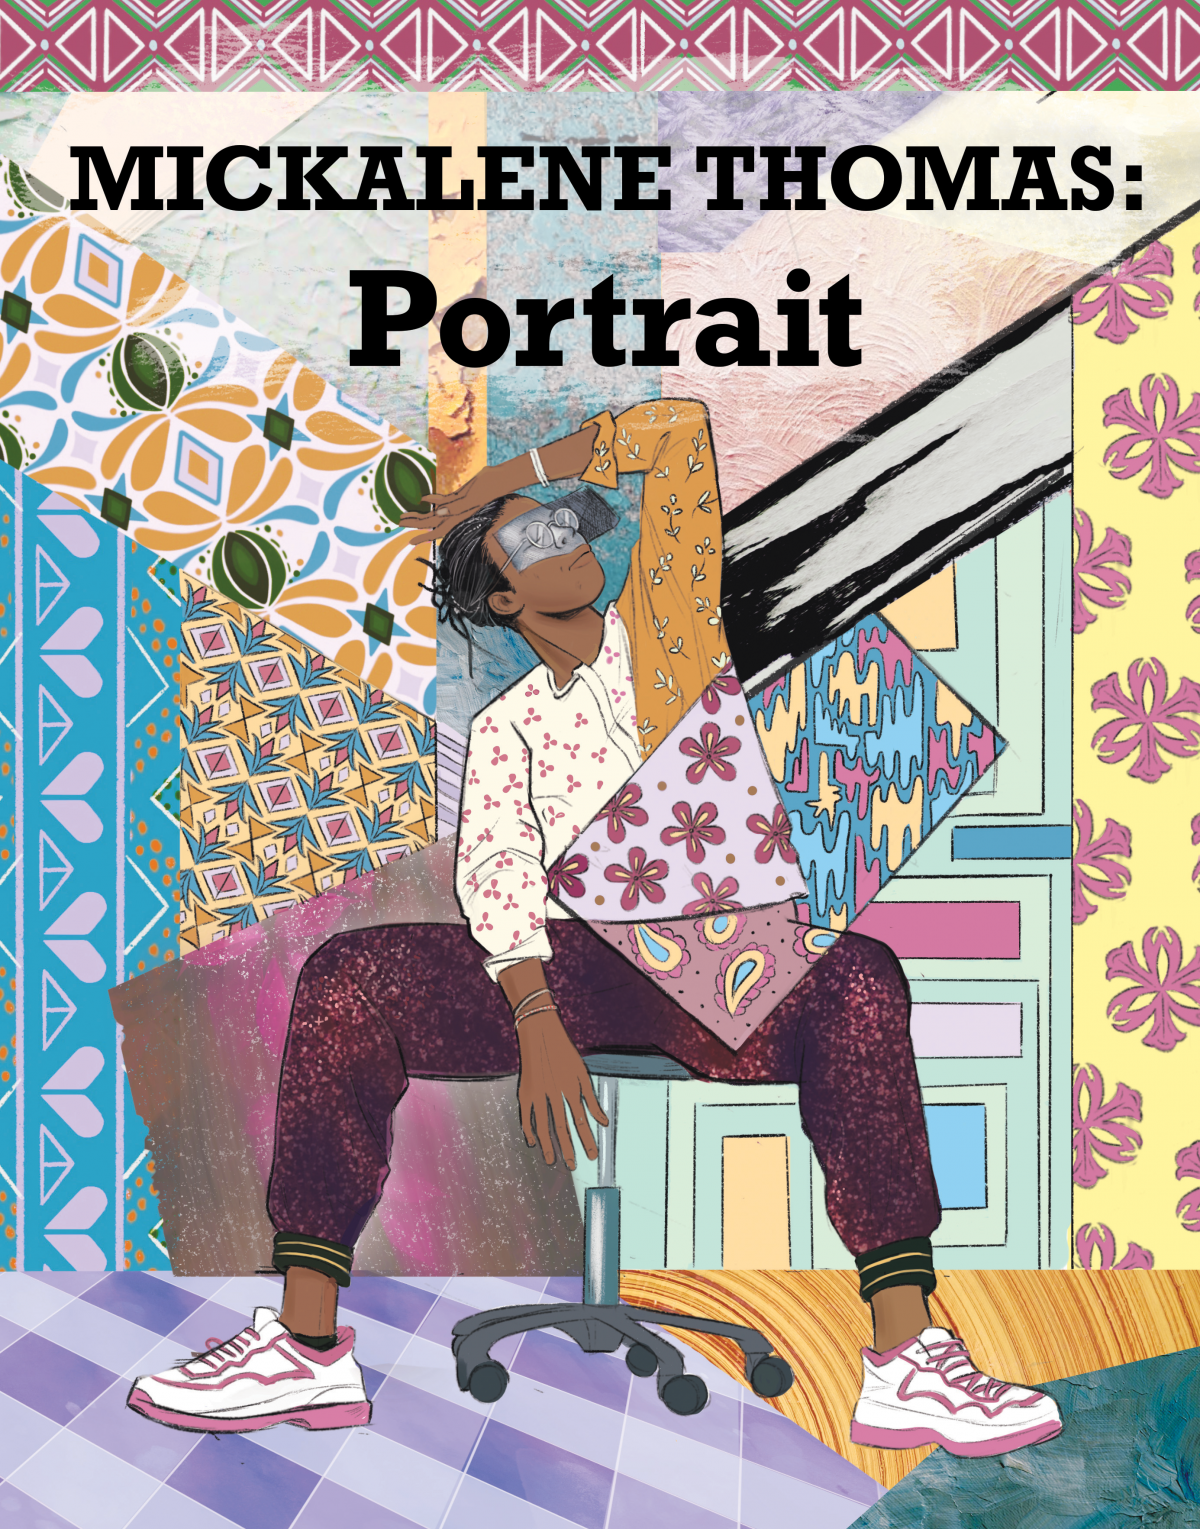 Black woman sitting on a chair in the center of the cover with her hand resting on her forehead set against a patchwork background of colorful geometric and floral patterns. Text  reads, “Mickalene Thomas: Portrait”